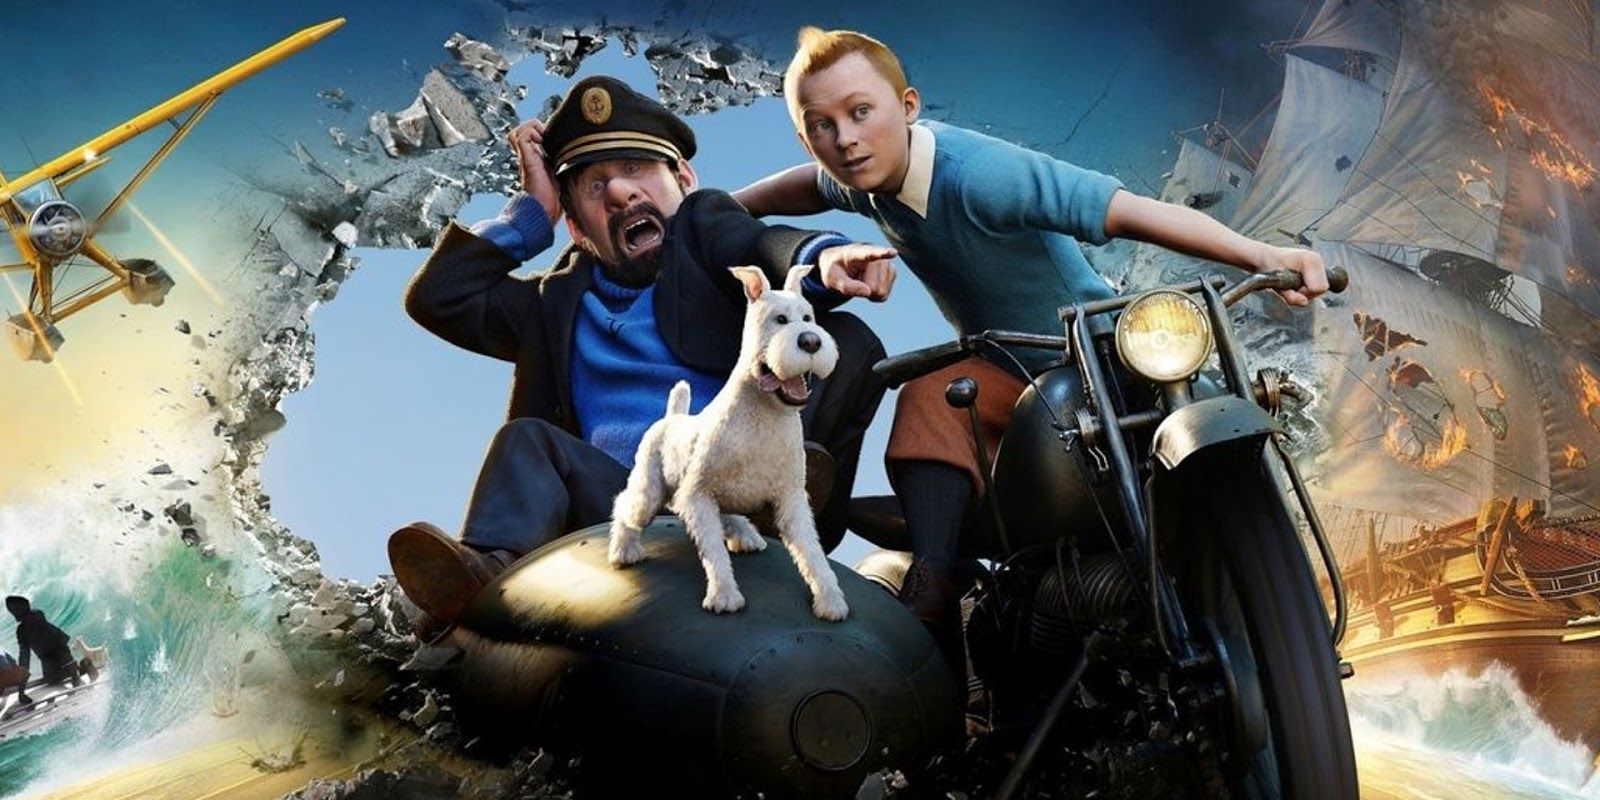 Tintin and his dog riding a motorcycle.